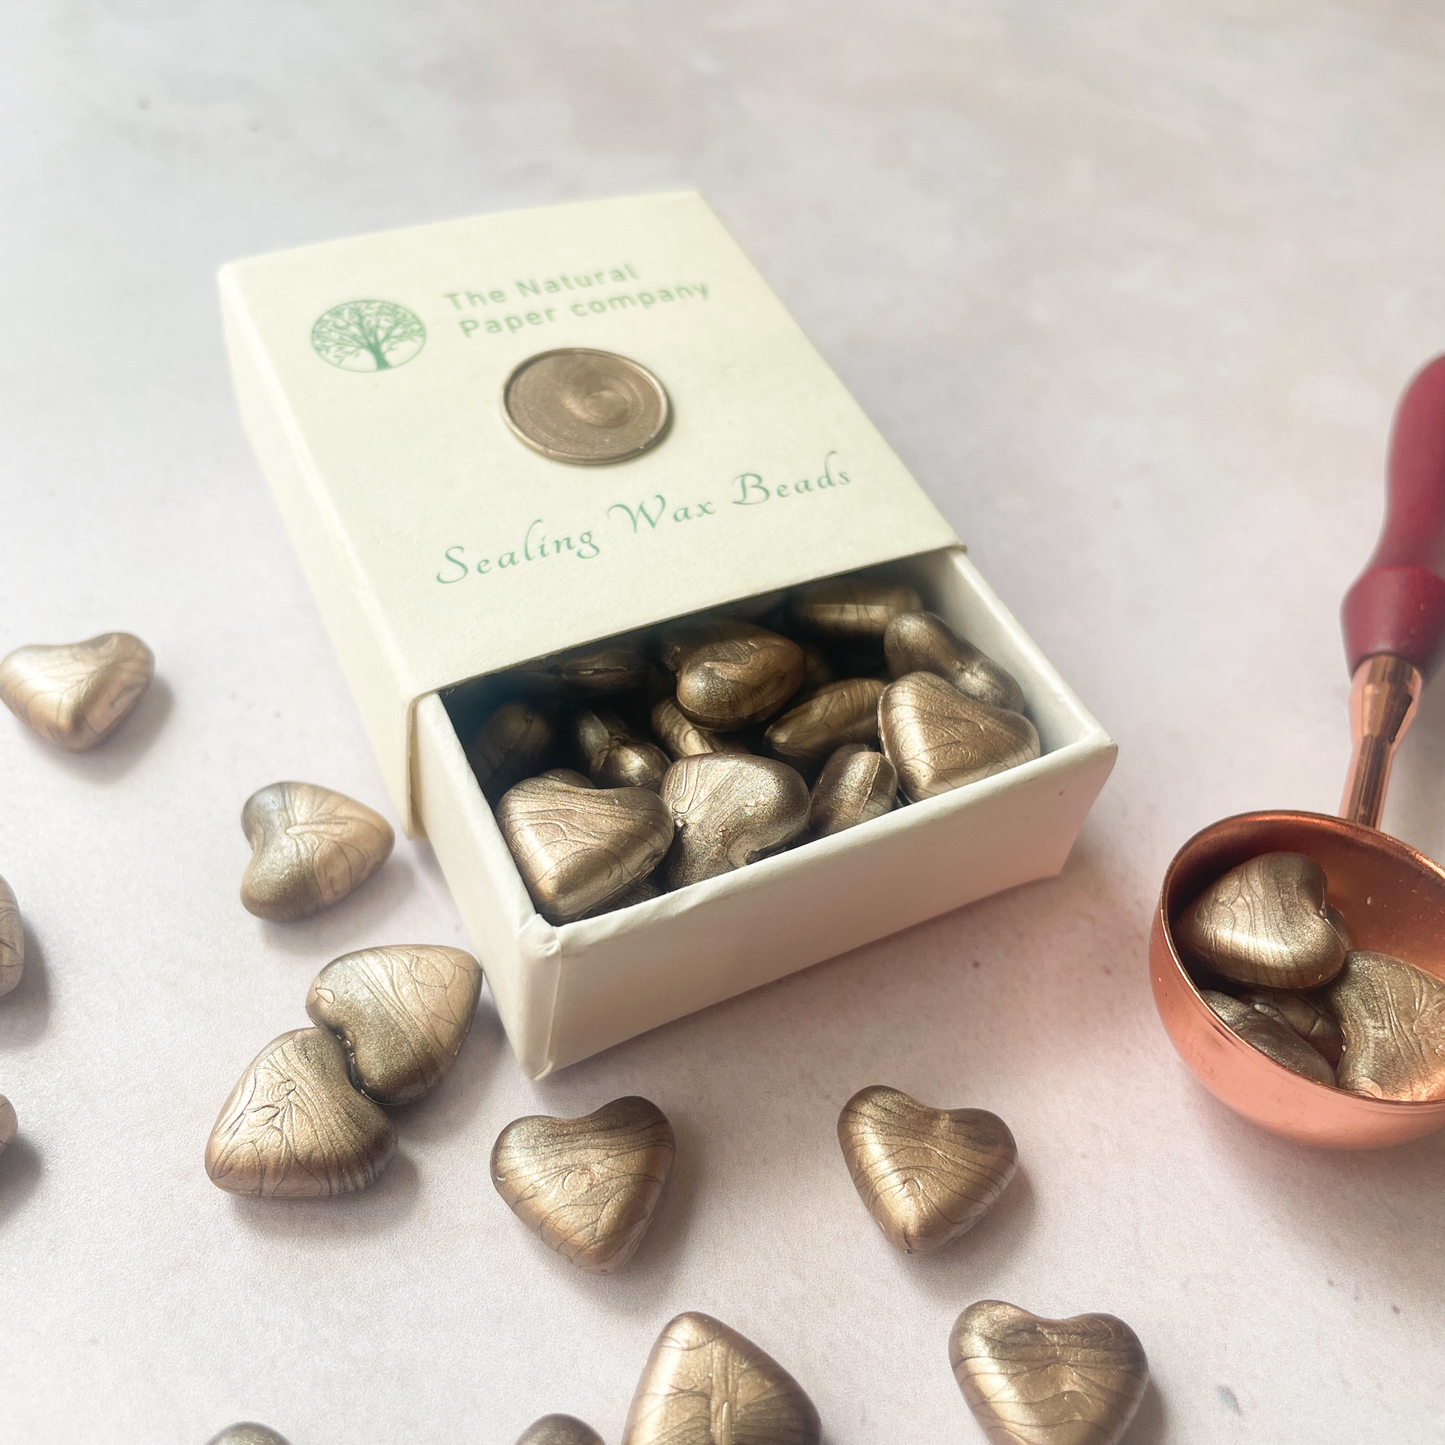 Champagne Gold Sealing Wax Beads in a Box.  Small box of eco friendly wax to make wax seals.  Plastic free, Paraffin free and biodegradable wax in a champagne gold colour.  By The Natural paper Company